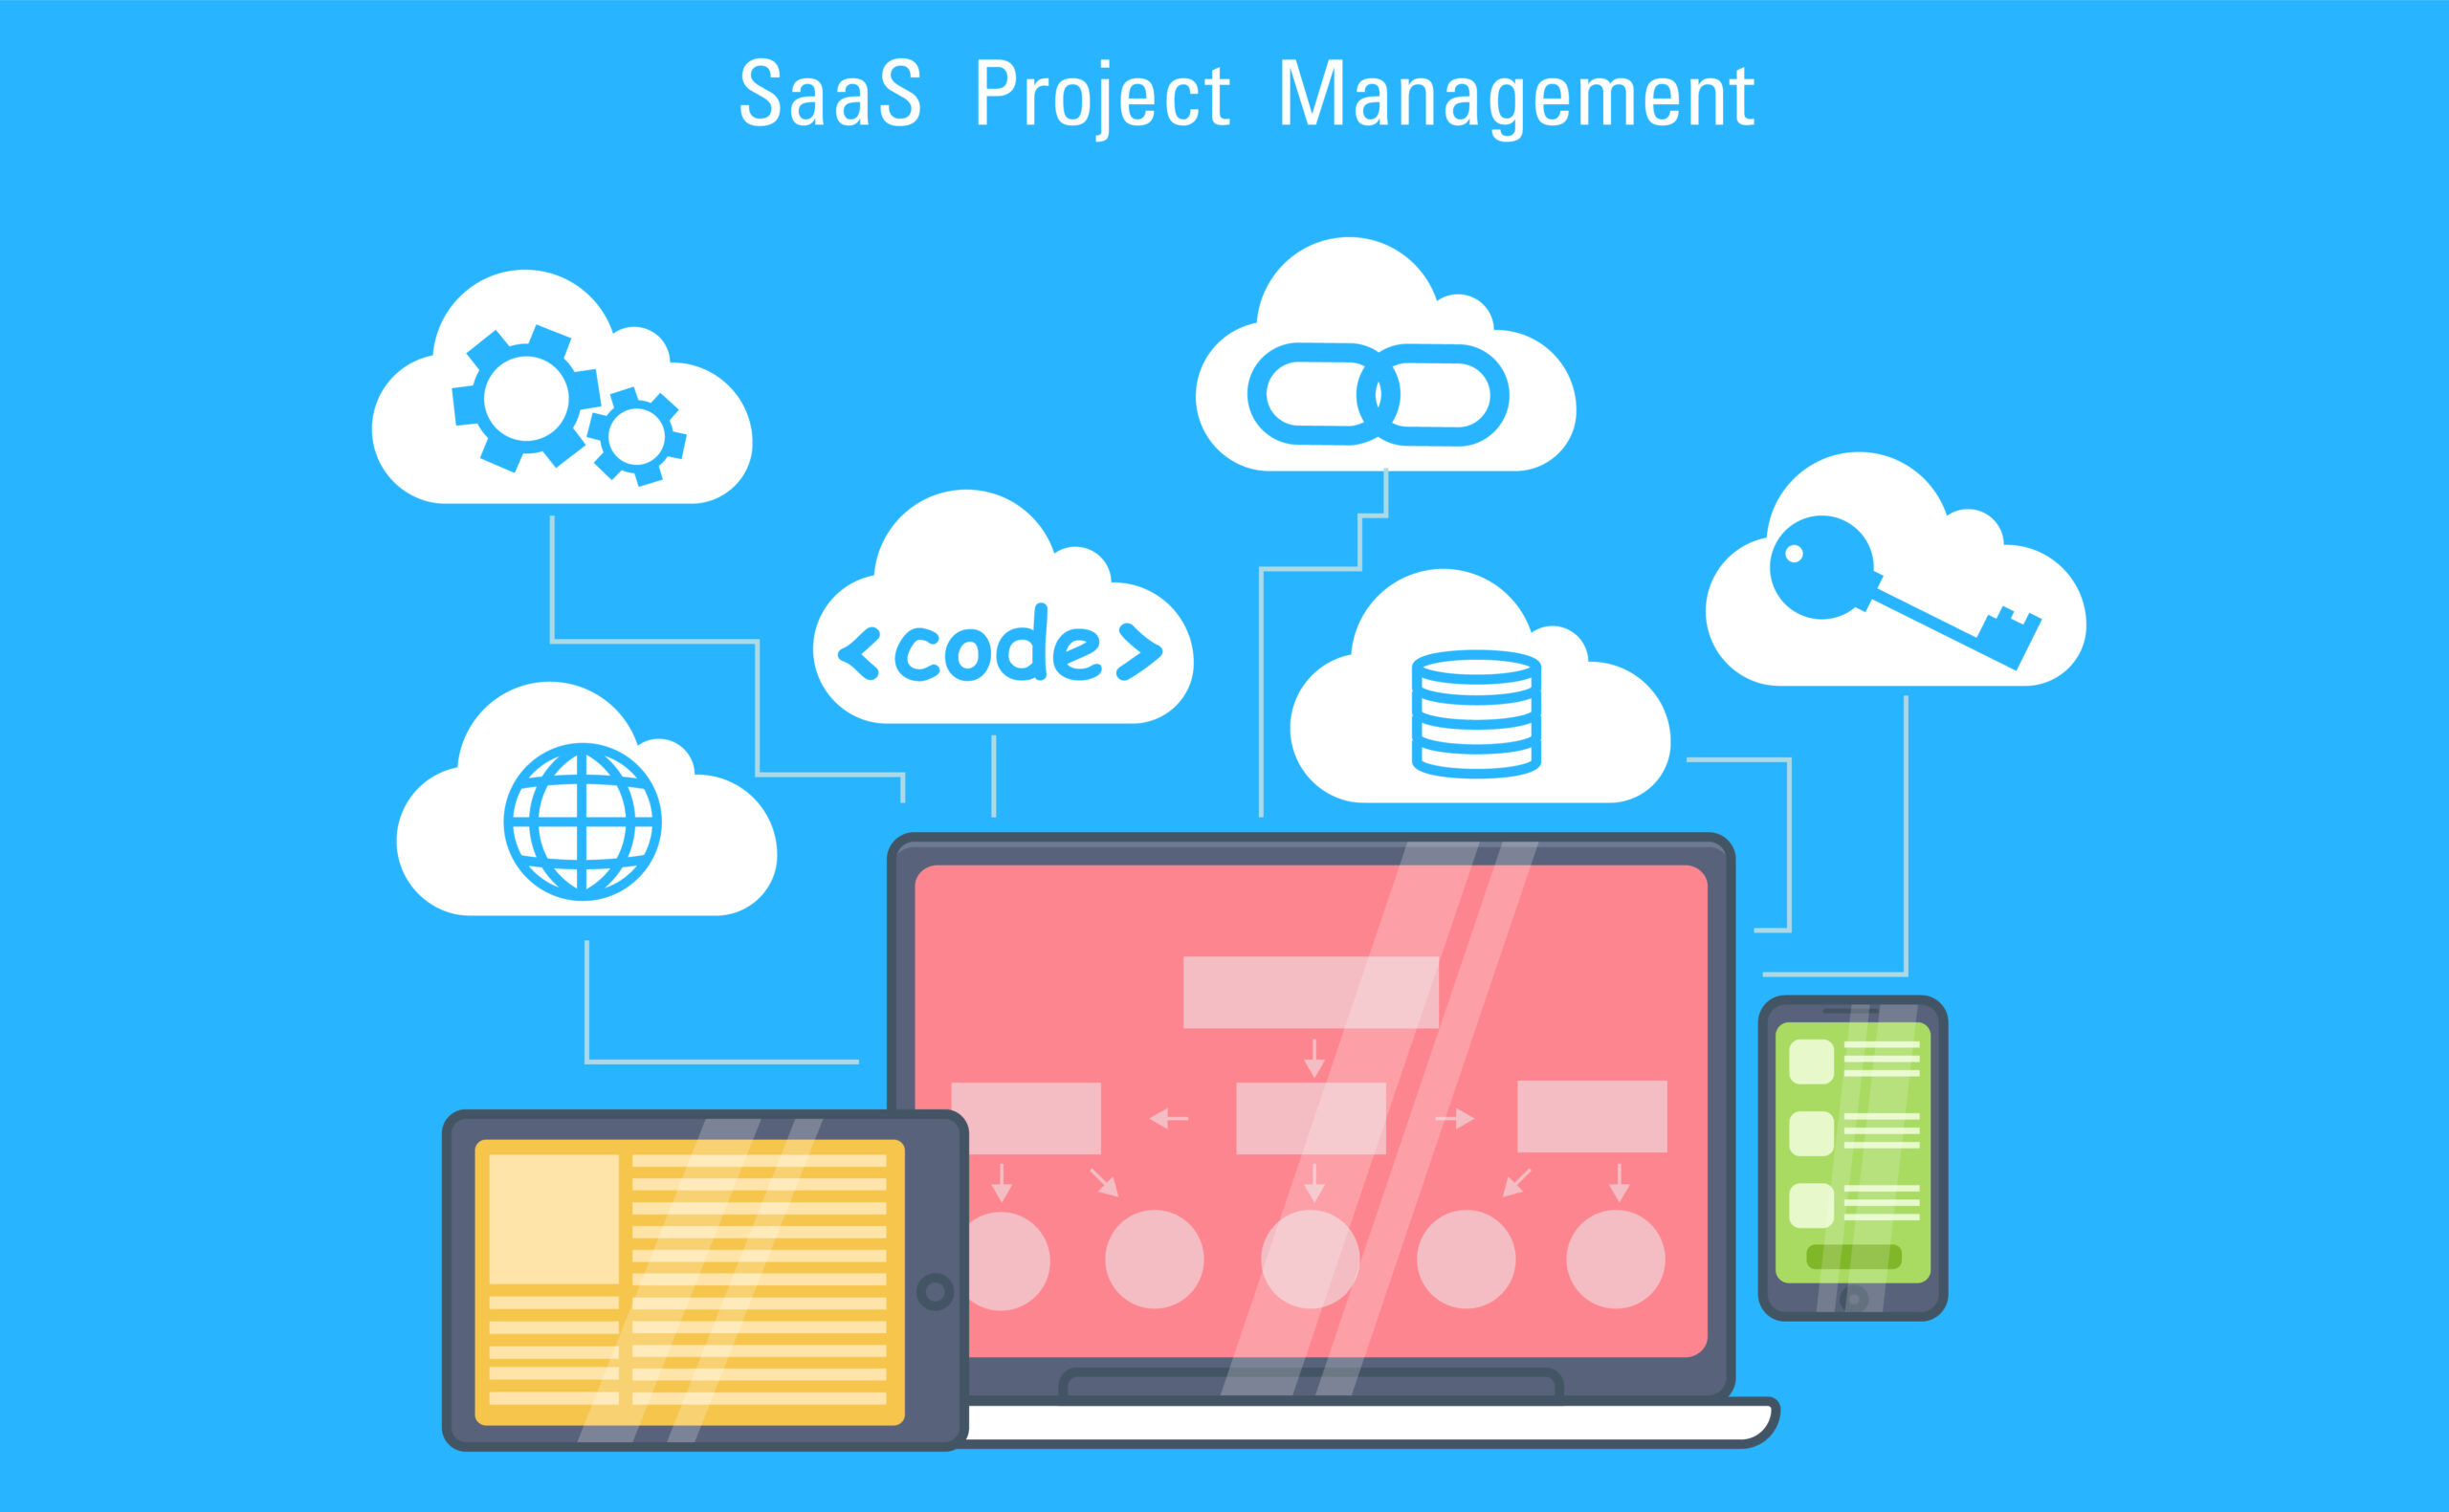 erp license and saas cloud subscription – pros and cons